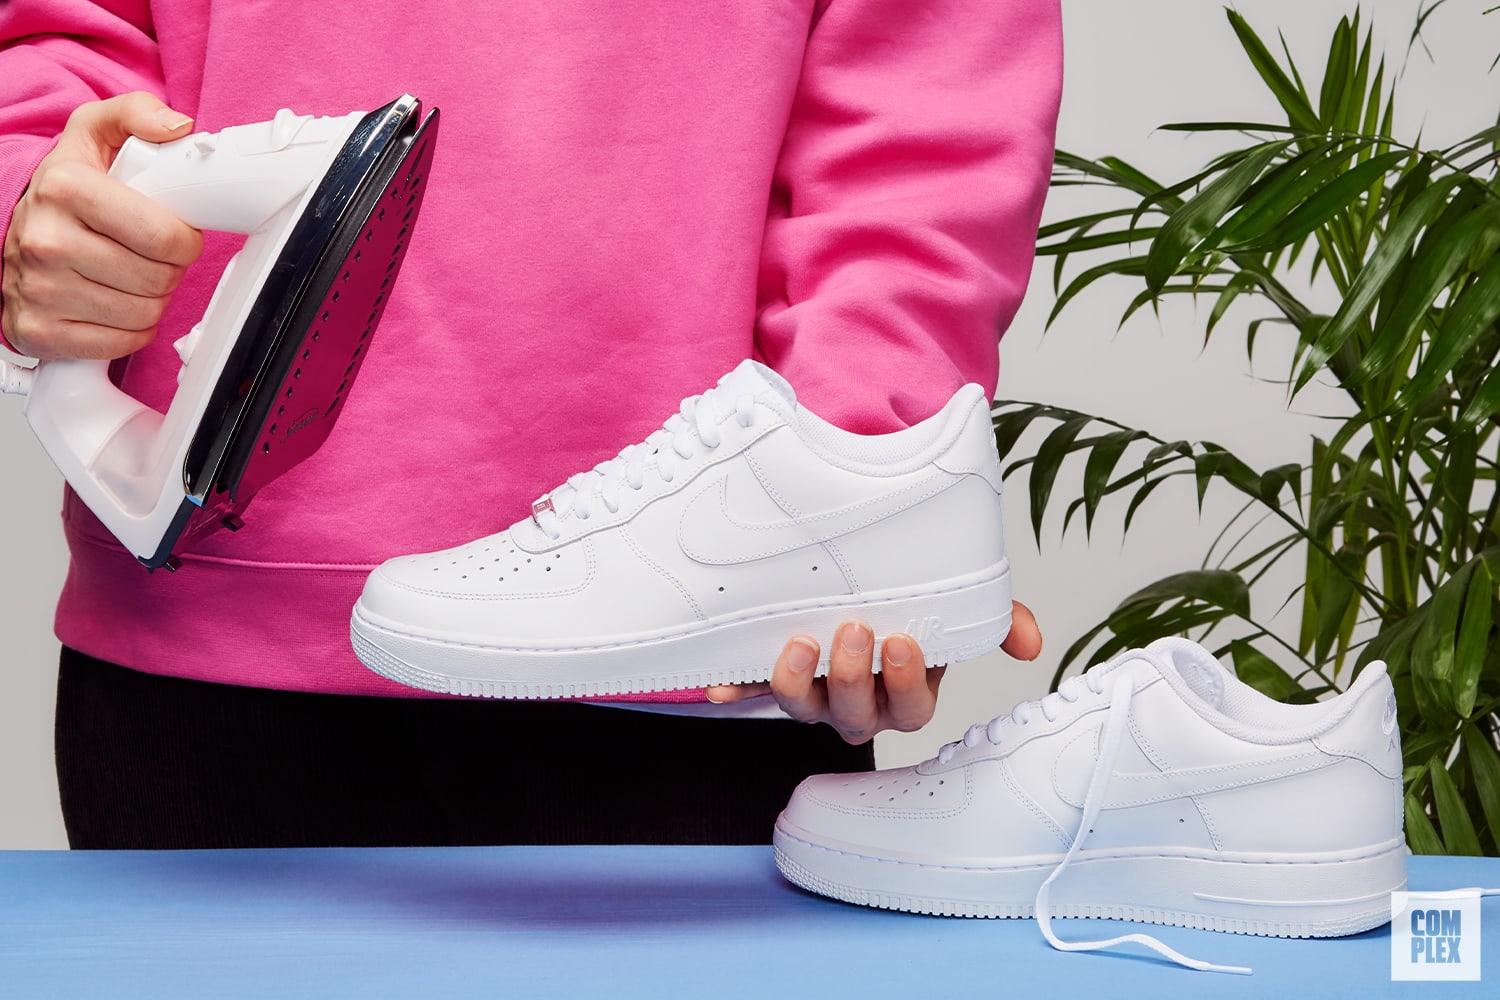 How to remove creases from Air Force Ones